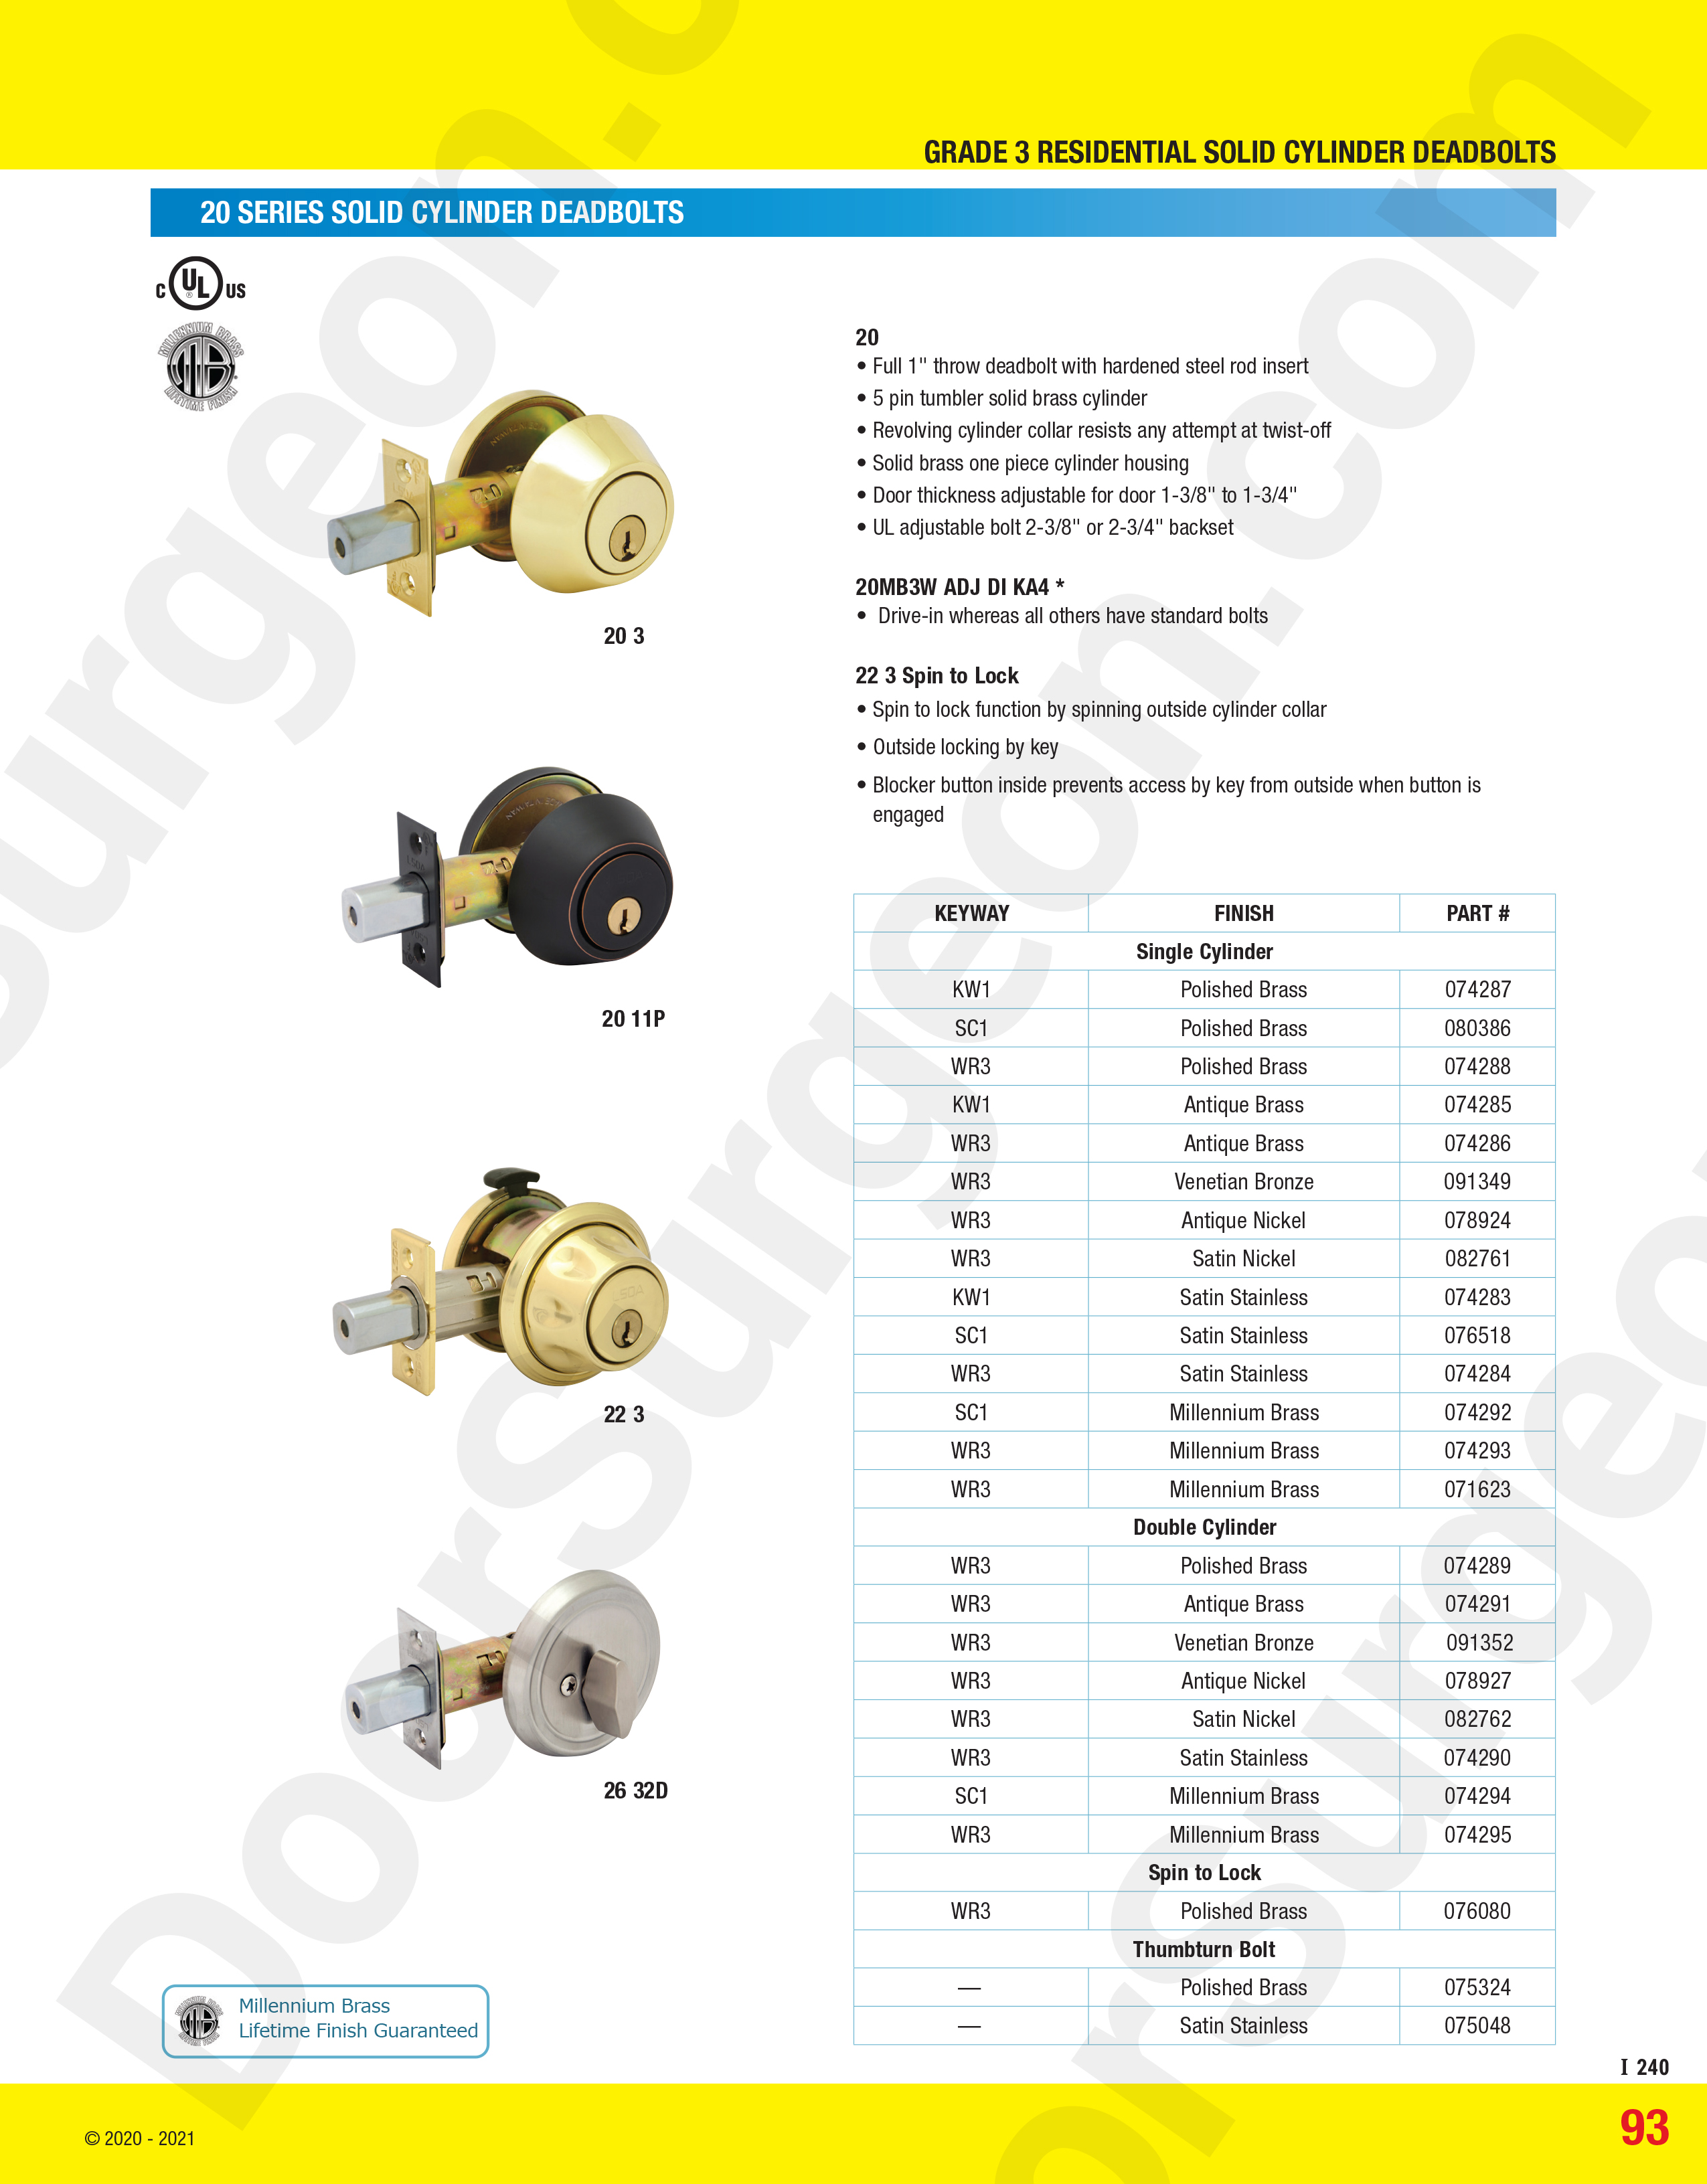 High grade deadbolts come in variety of colours, single-sided cylindar or double-sided cylinder.